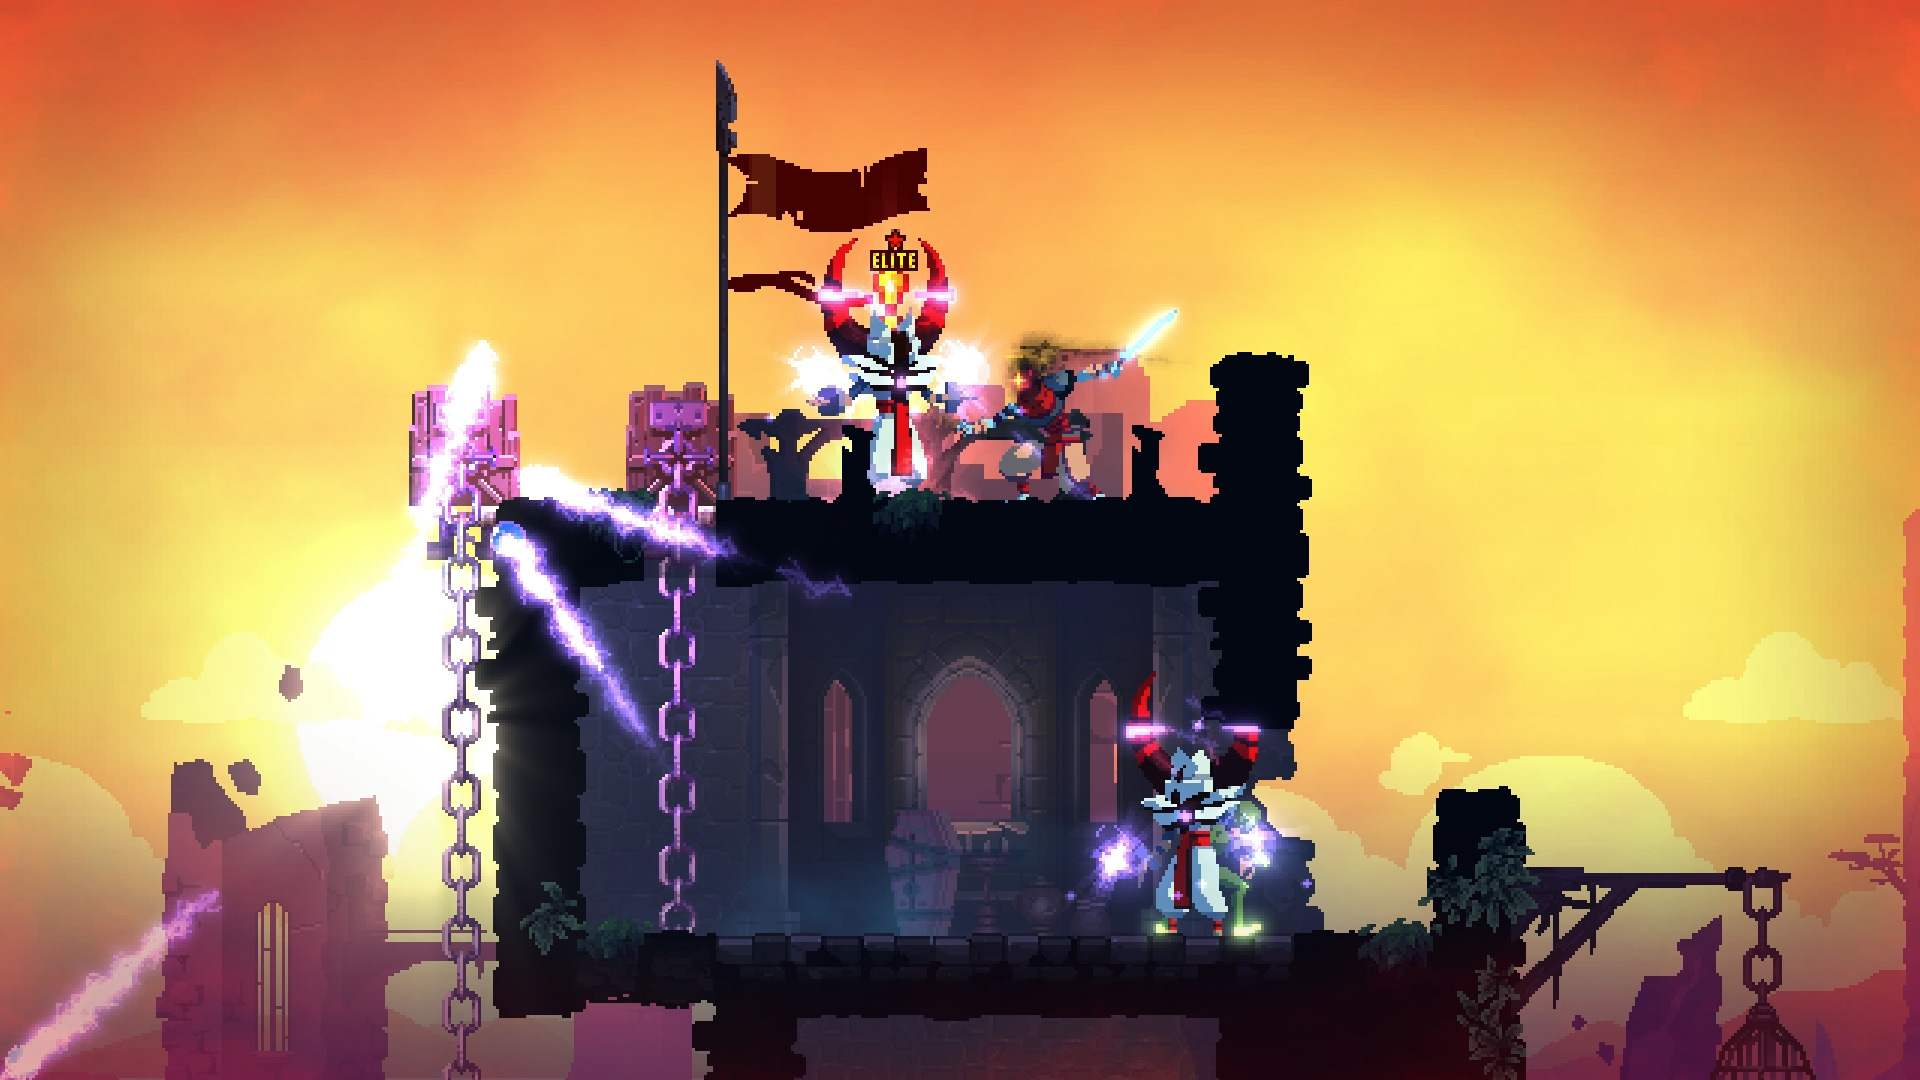 Dead Cells review - one of the slickest dungeon-crawlers you'll ever play